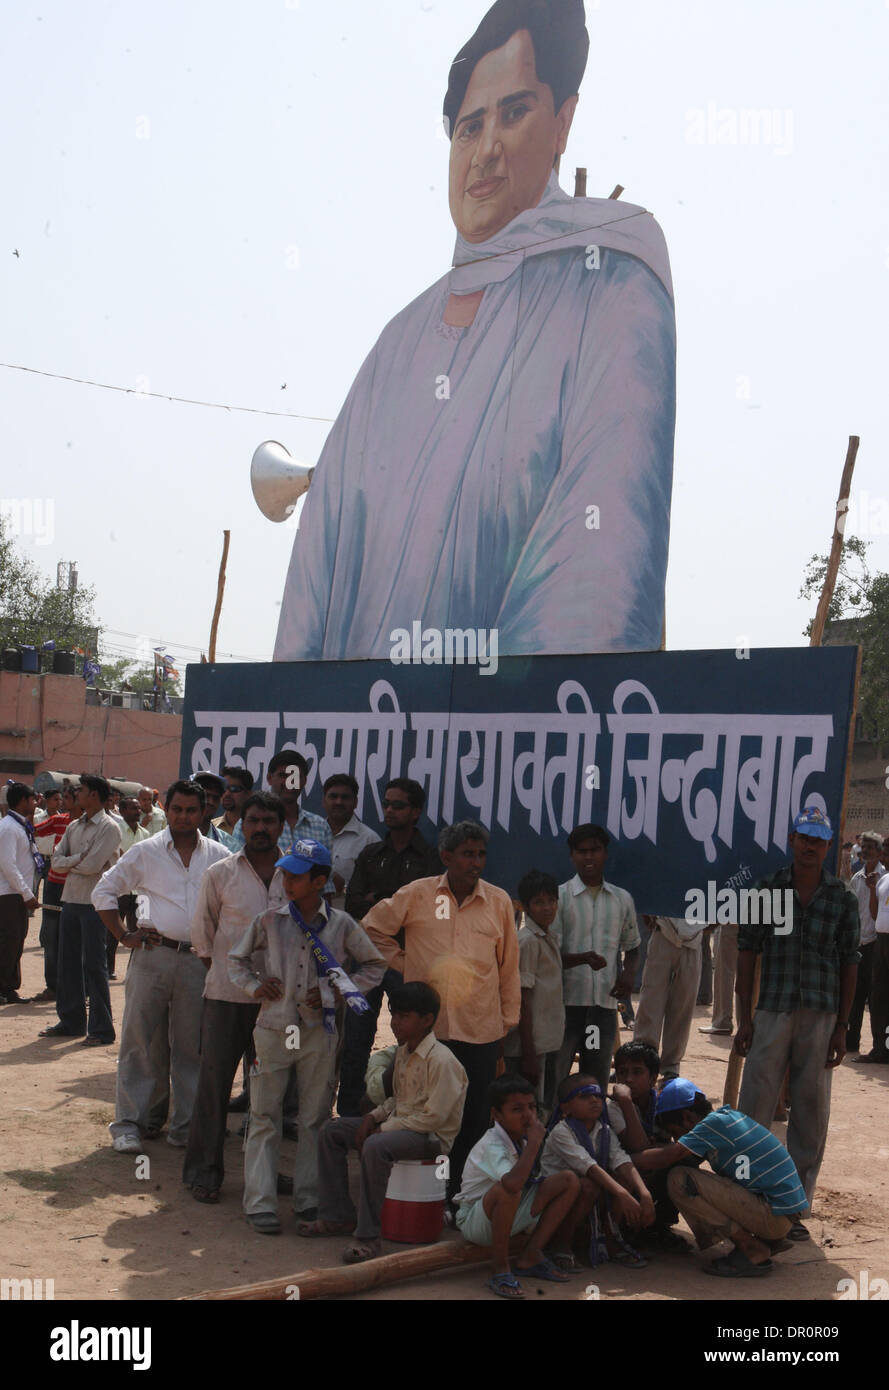 May 04, 2009 - Ghaziabad, India - Supporters of Mayawati, the chief minister of the Indian state Uttar Pradesh and Bahujan Samaj Party (BSP) president, who is shown on the billboard at rear, arrive for a campaign rally. (Credit Image: © Pankaj Nangia/ZUMA Press) Stock Photo